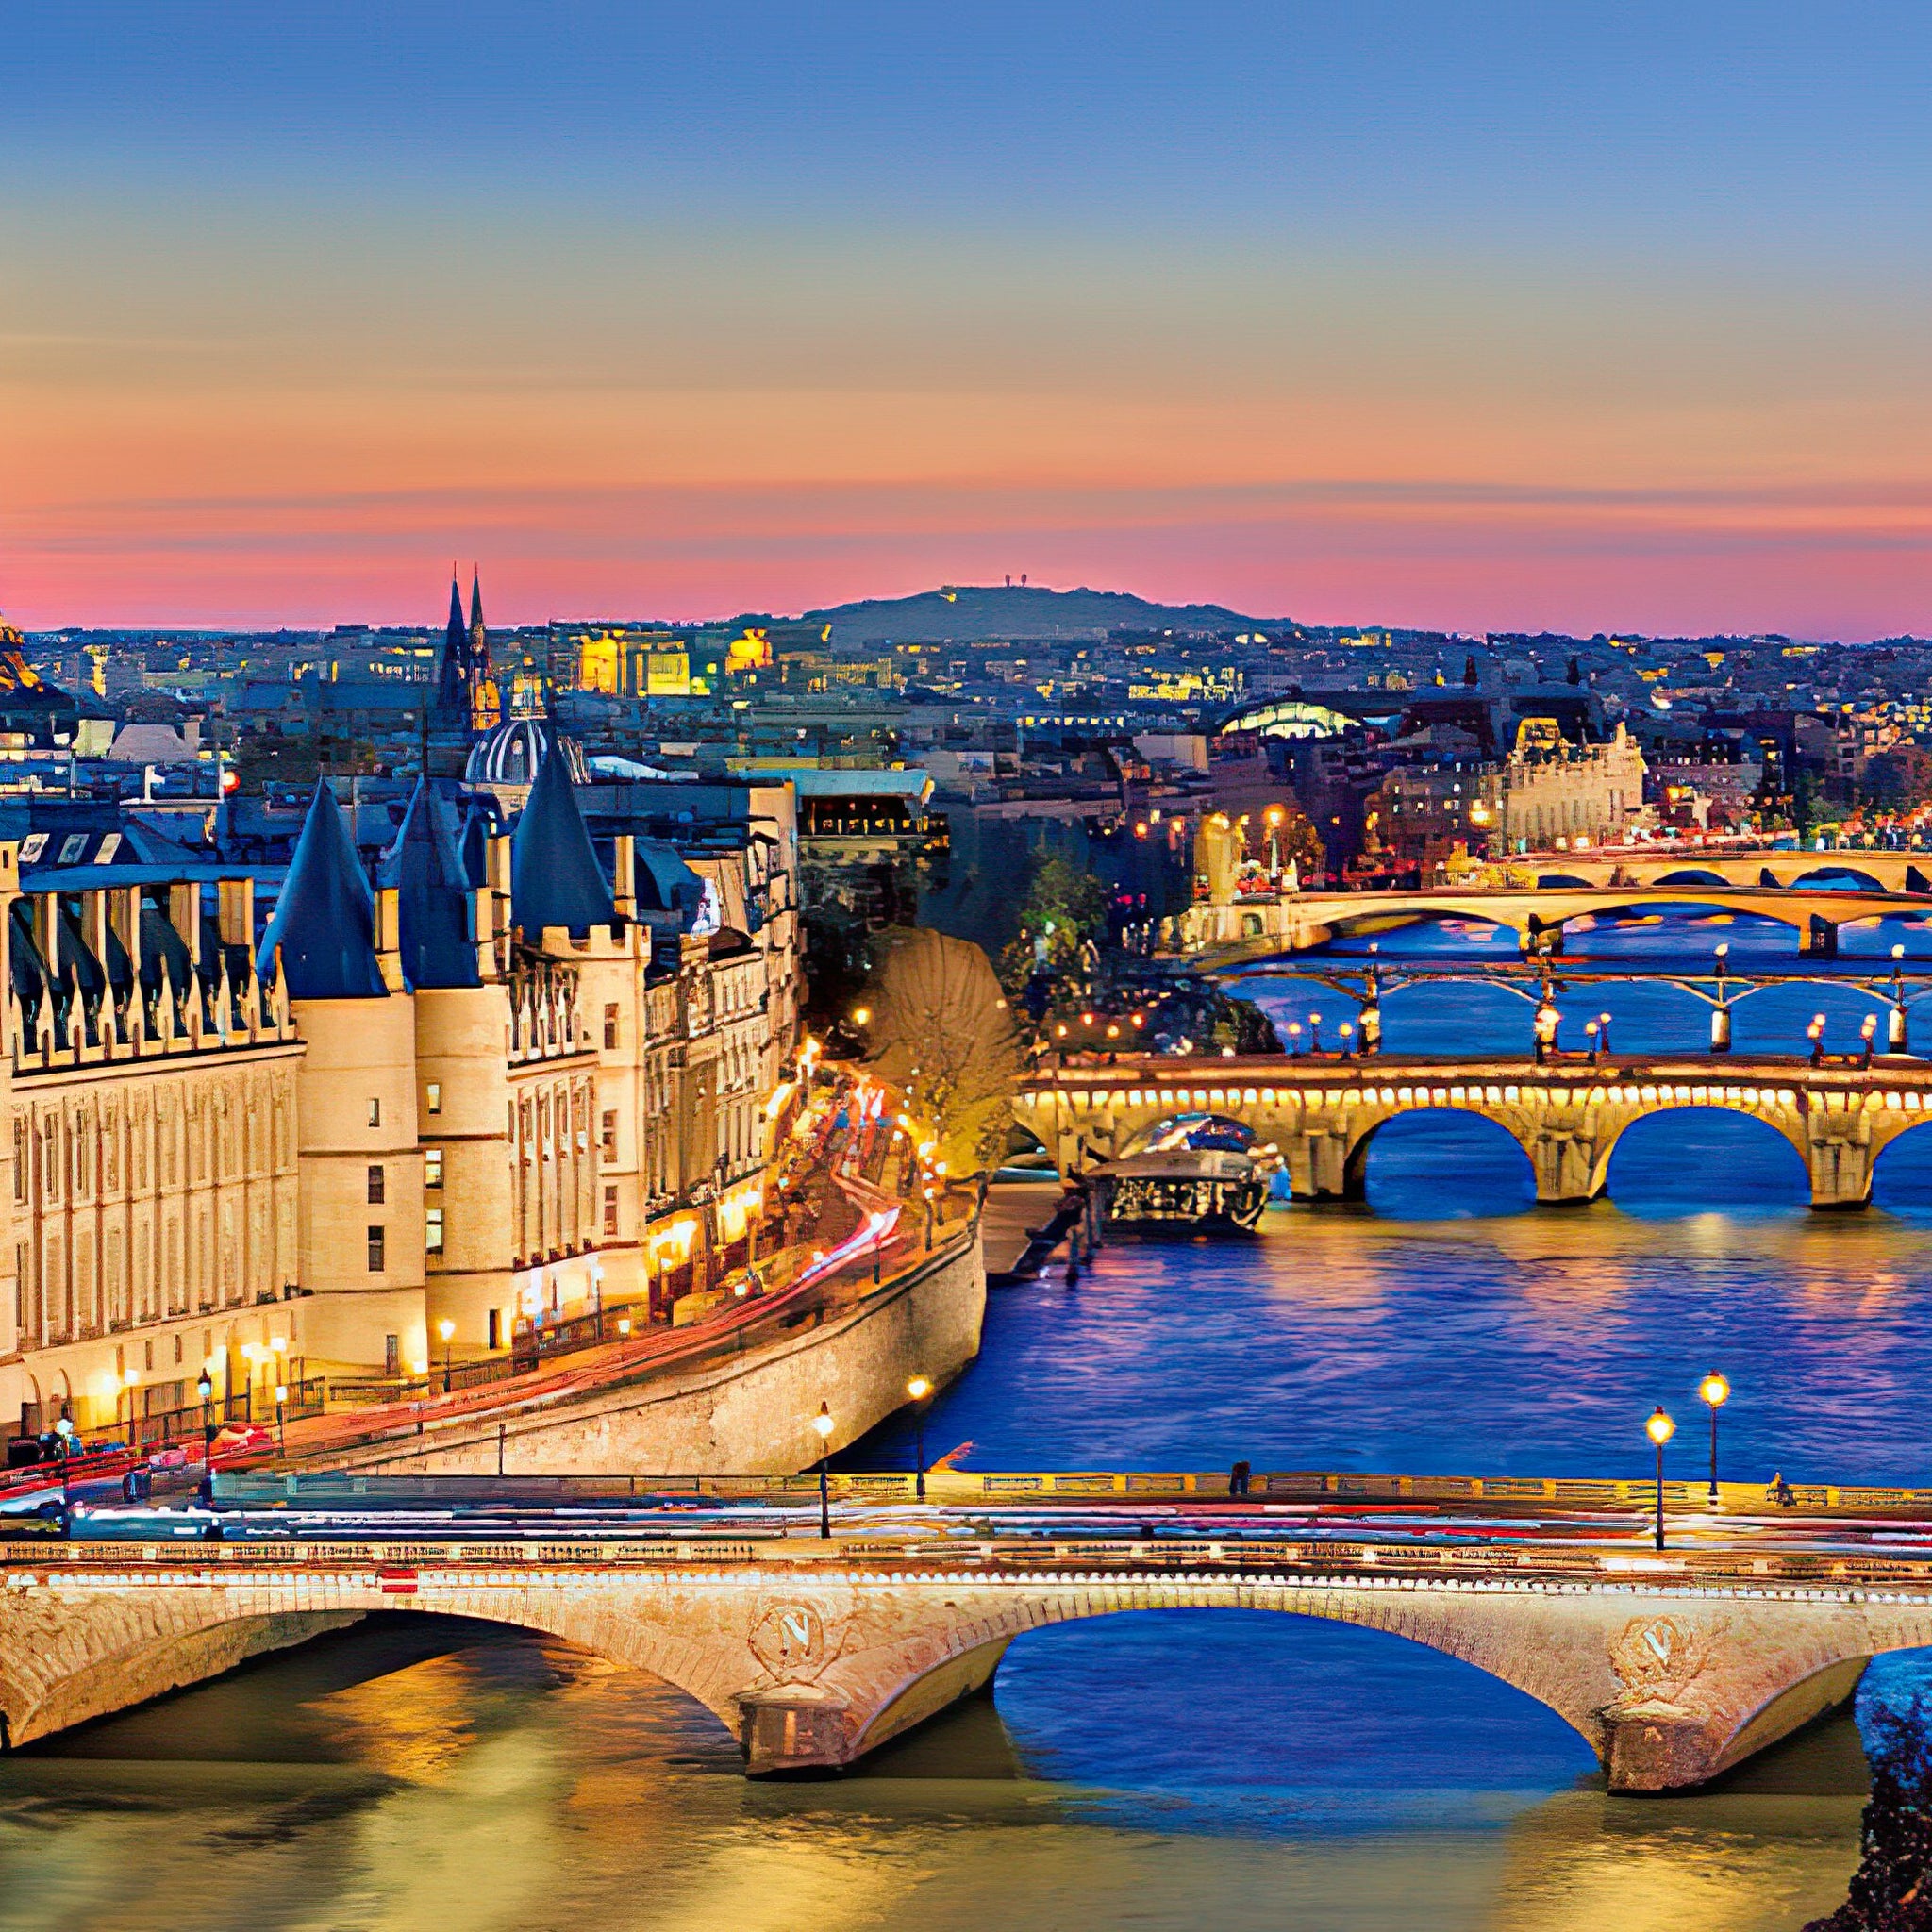 Beverly • Scenery • Seine River at Dusk　1000 PCS　Jigsaw Puzzle